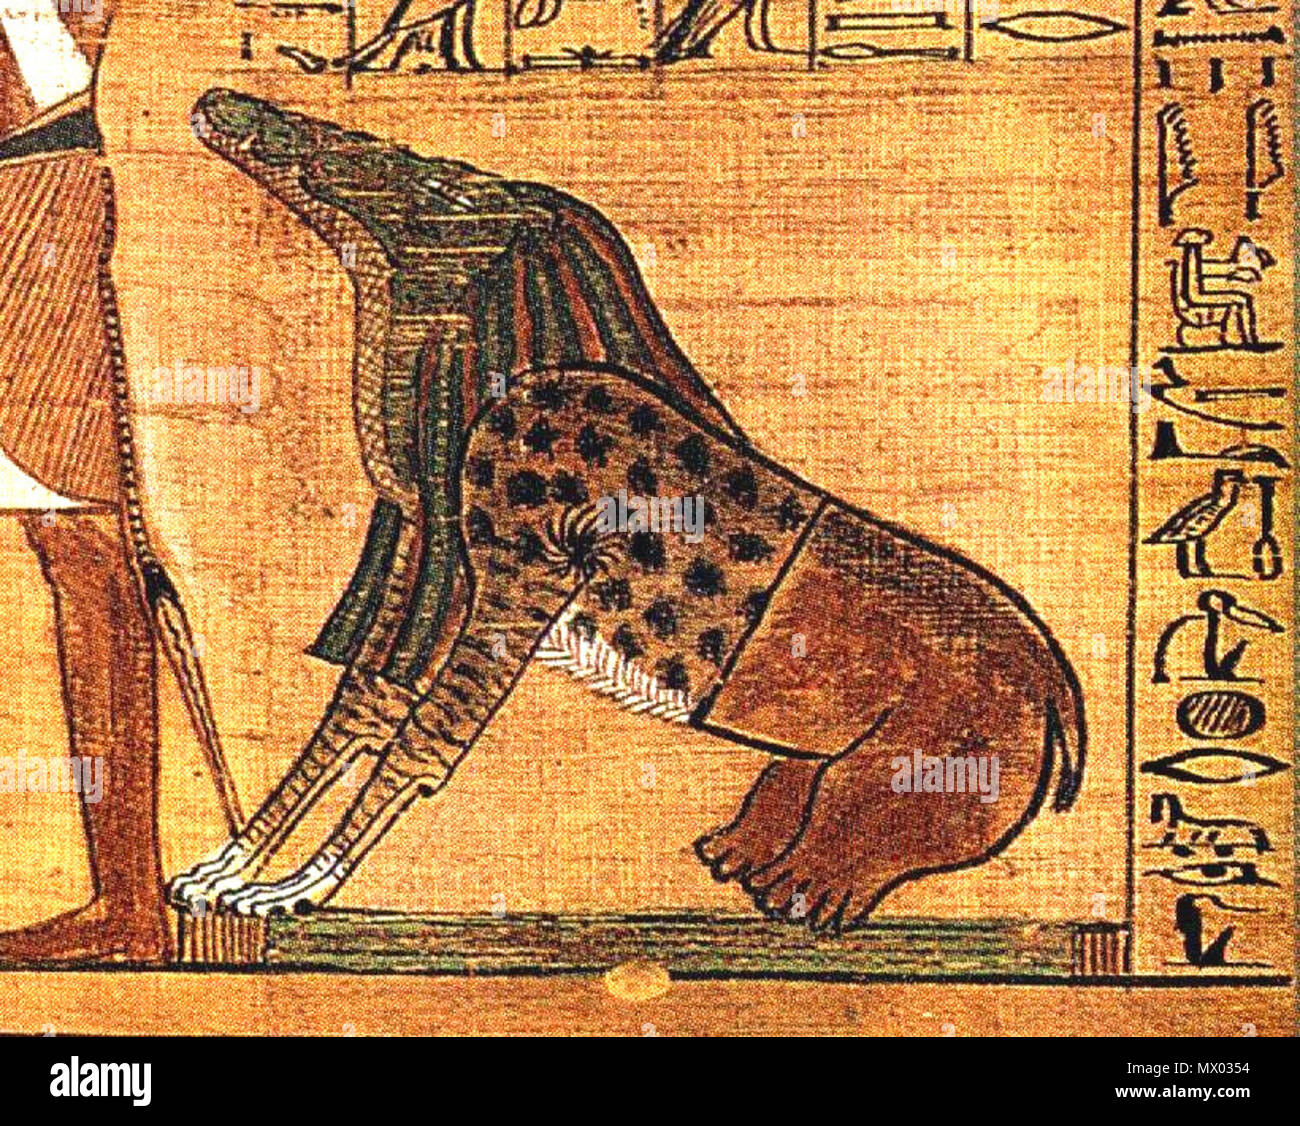 .  English: The Weighing of the Heart from the Book of the Dead of Ani. At left, Ani and his wife Tutu enter the assemblage of gods. At center, Anubis weighs Ani's heart against the feather of Maat, observed by the goddesses Renenutet and Meshkenet, the god Shay, and Ani's own ba. At right, the monster Ammut, who will devour Ani's soul if he is unworthy, awaits the verdict, while the god Thoth prepares to record it. At top are gods acting as judges: Hu and Sia, Hathor, Horus, Isis and Nephthys, Nut, Geb, Tefnut, Shu, Atum, and Ra-Horakhty. . 13 May 2011, 11:05 (UTC).  BD Weighing of the Heart. Stock Photo